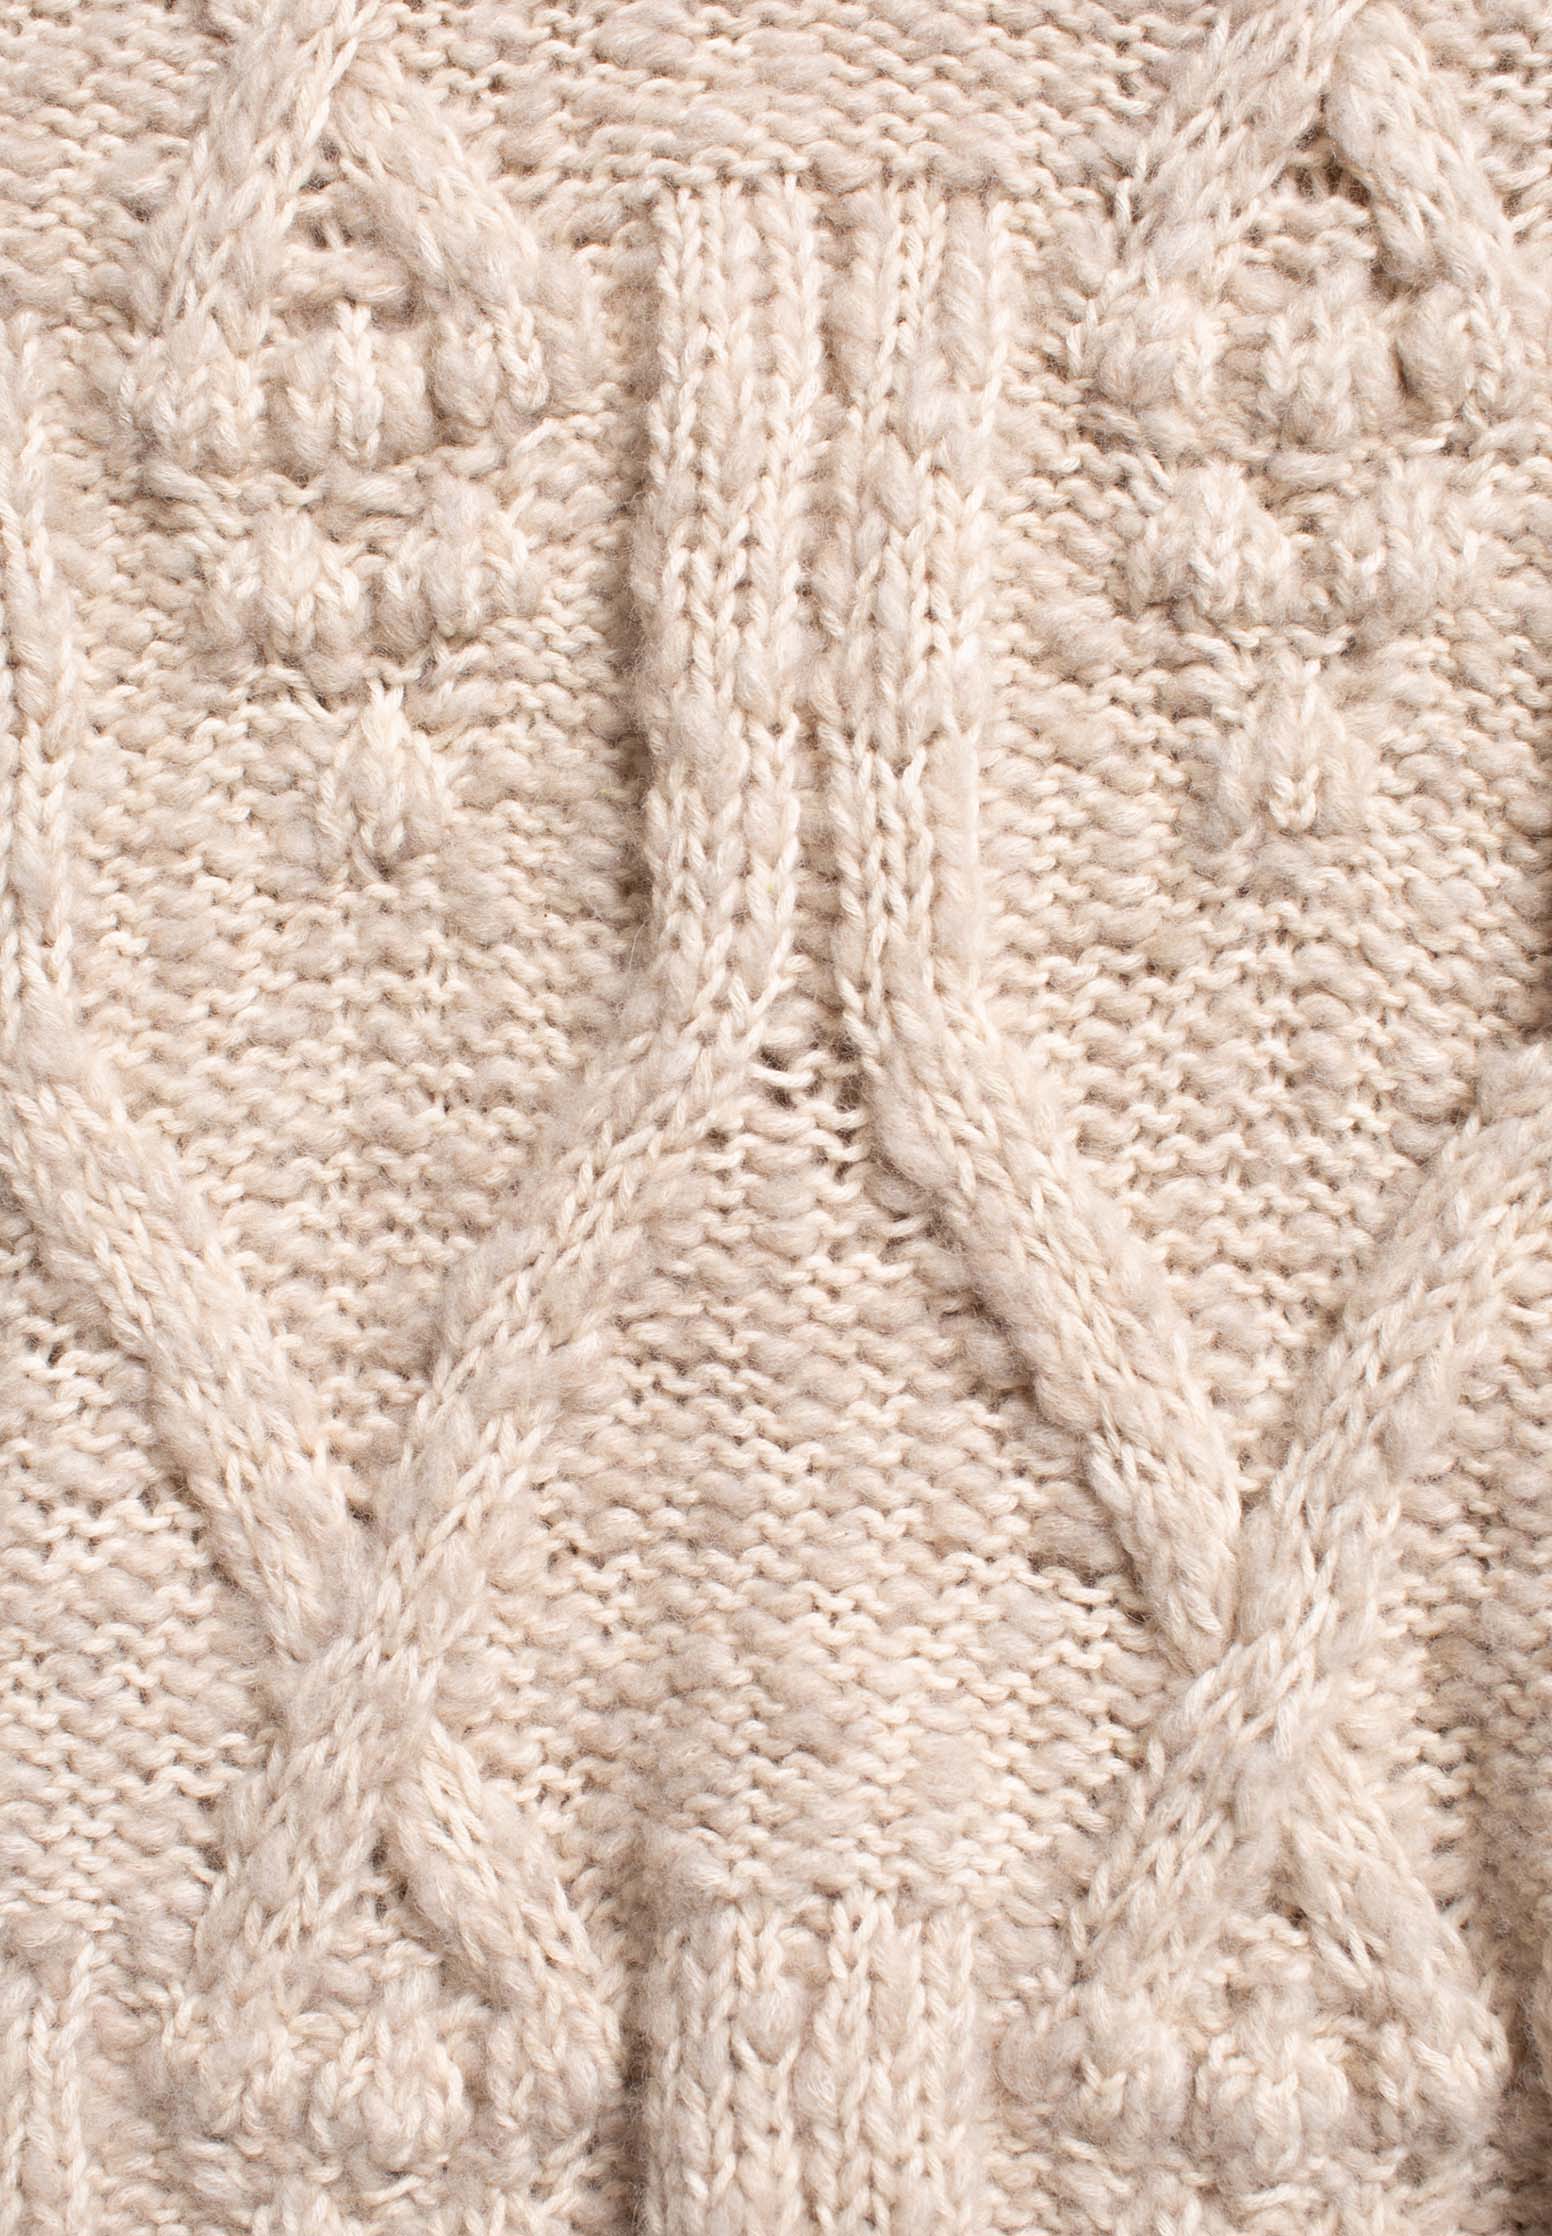 NUDIE JEANS Strickpullover Elsa Cable Knit oat S